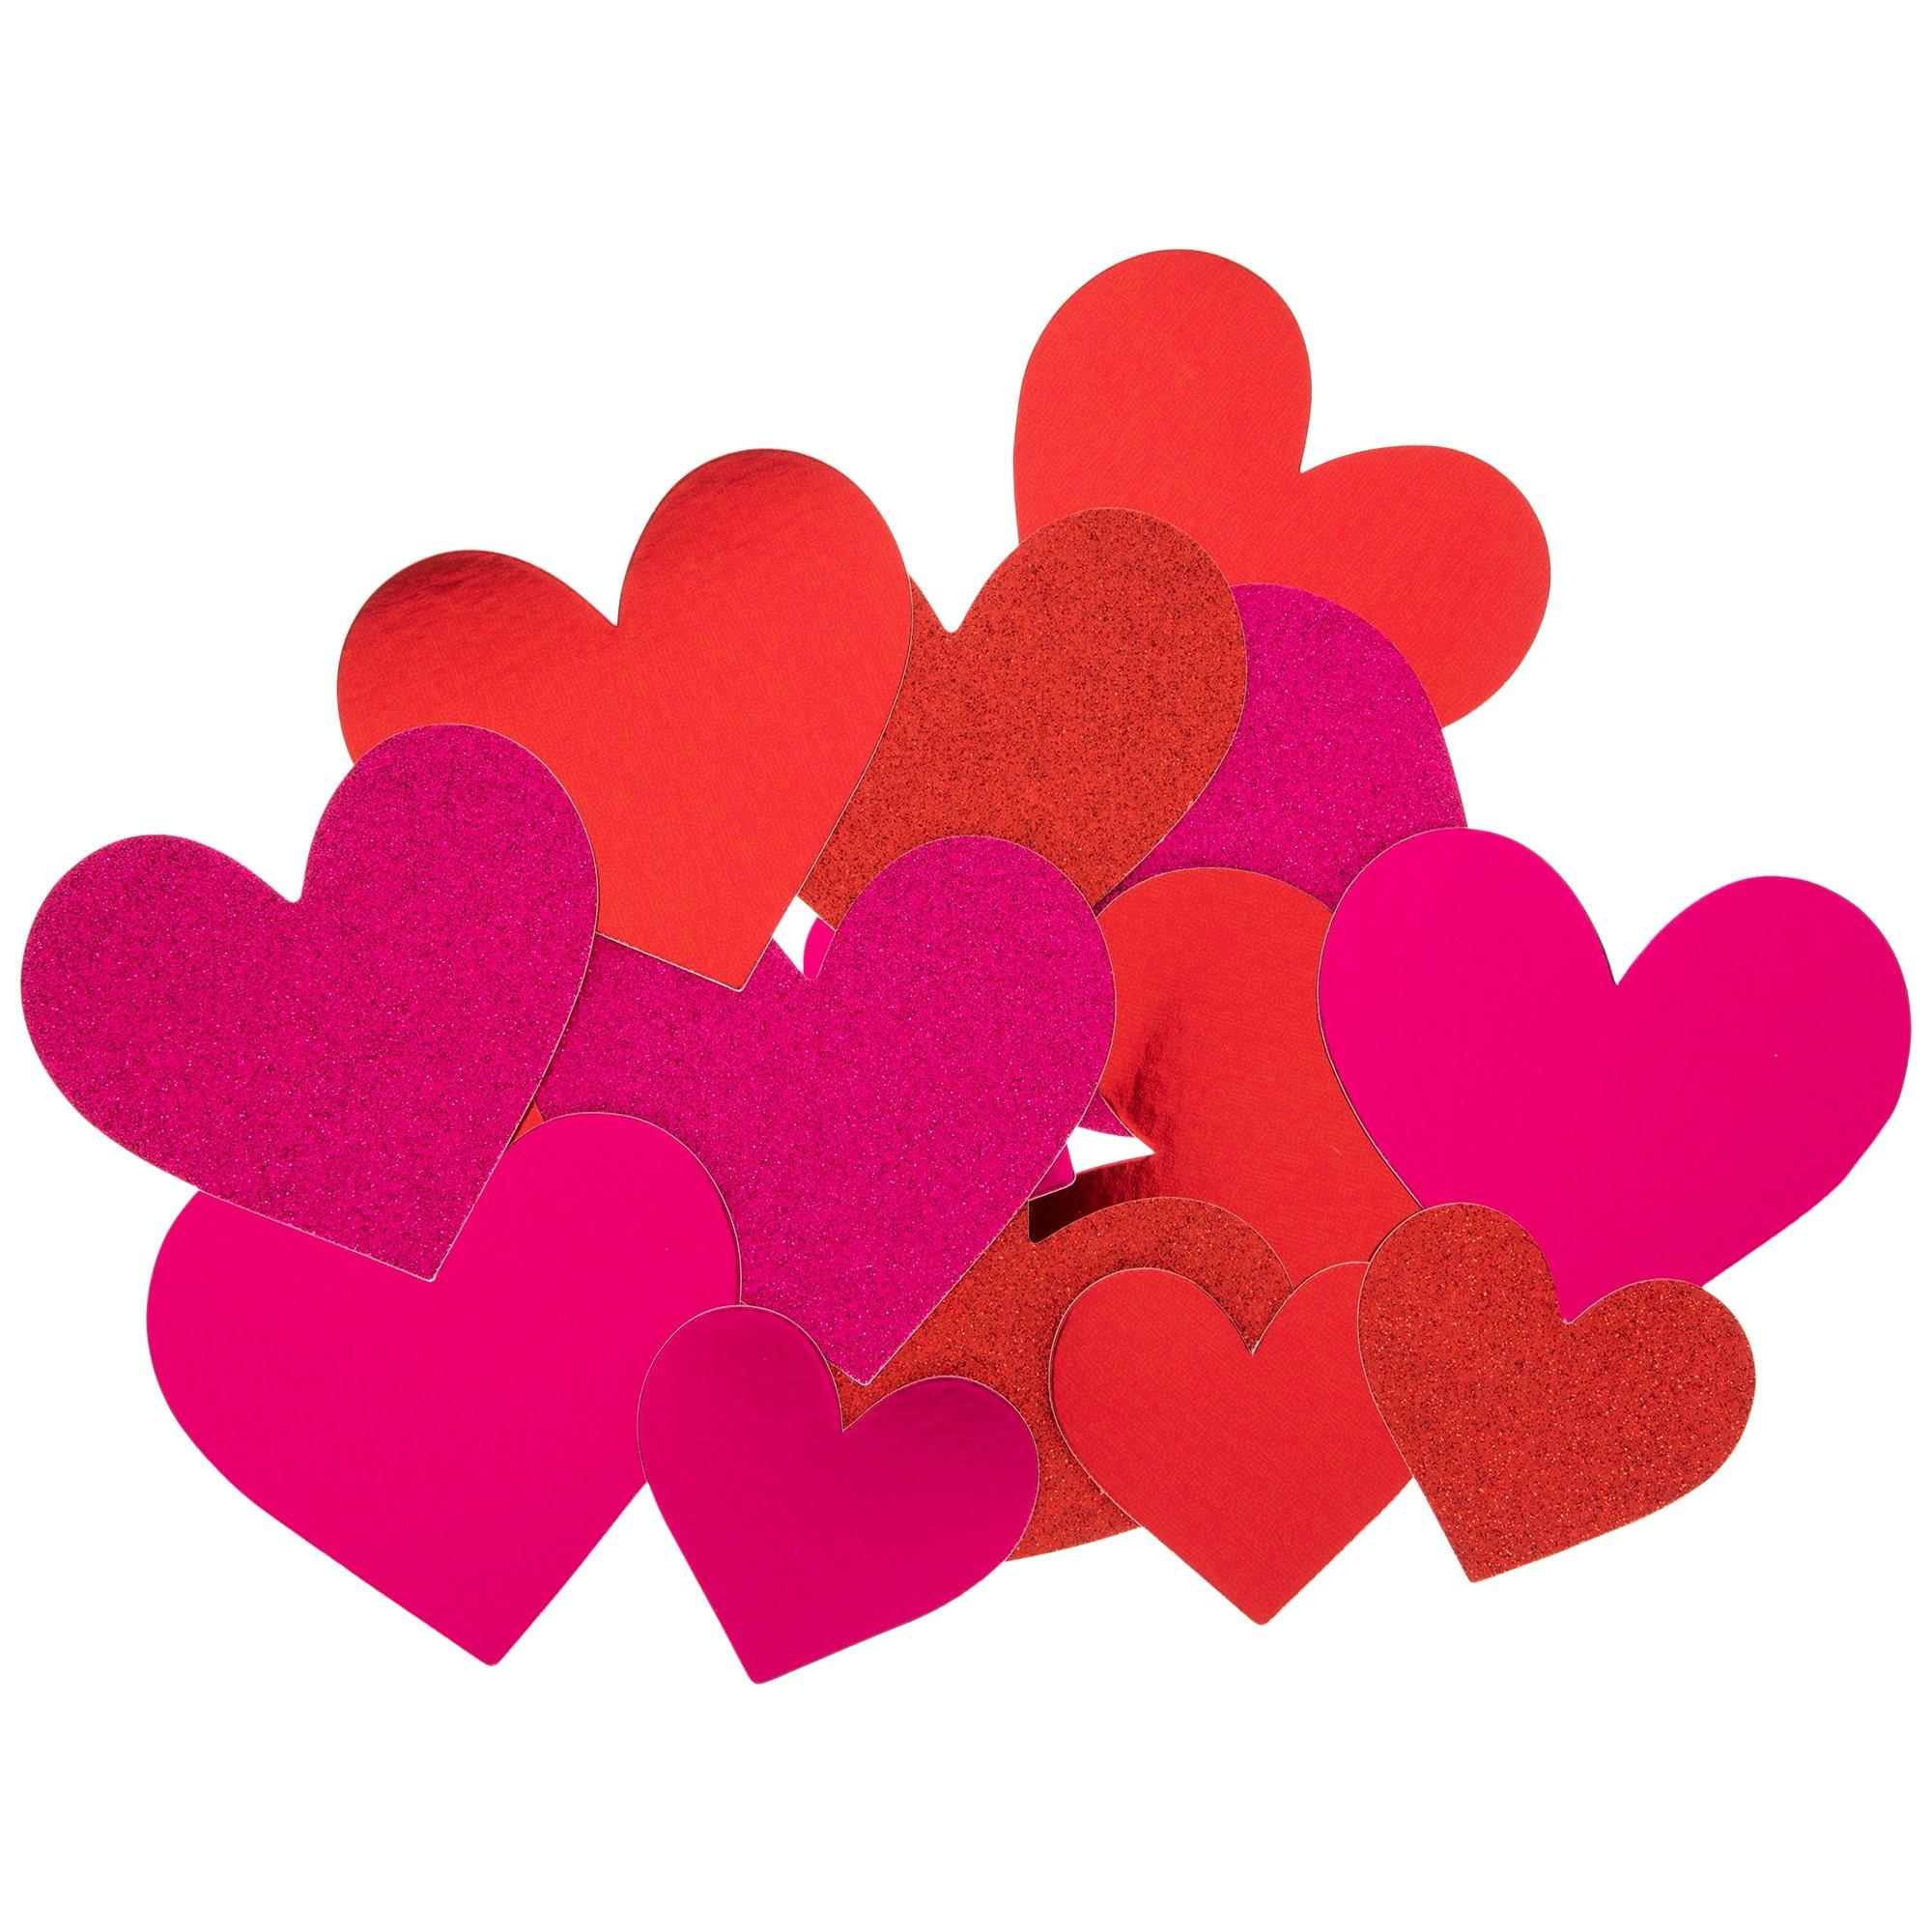 Royal Green Red and Pink Hearts Stickers - 290 Pack - Decorative Heart Shaped Label for Arts, Favors and Crafts in Colors for Valentine’s Day